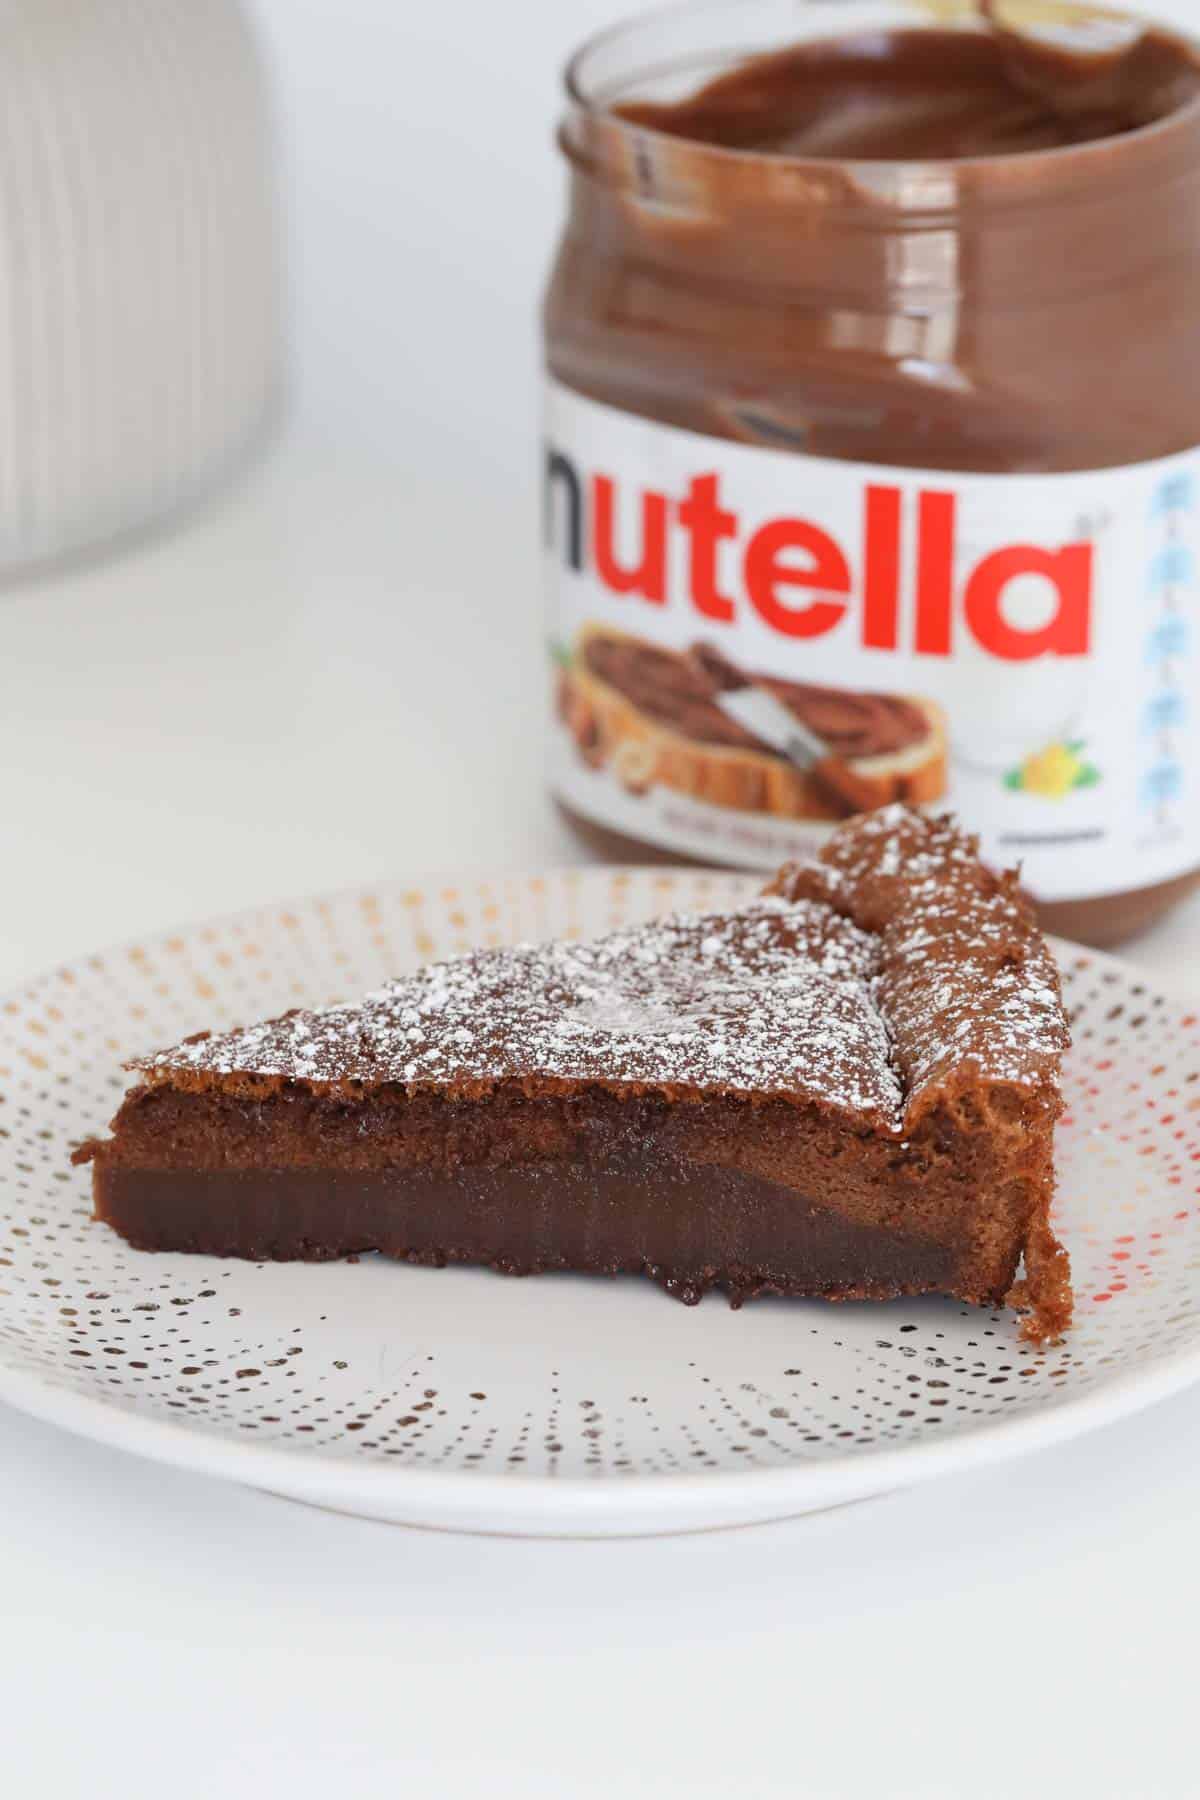 A slice of Nutella cake on a plate with a jar of Nutella just visible behind.